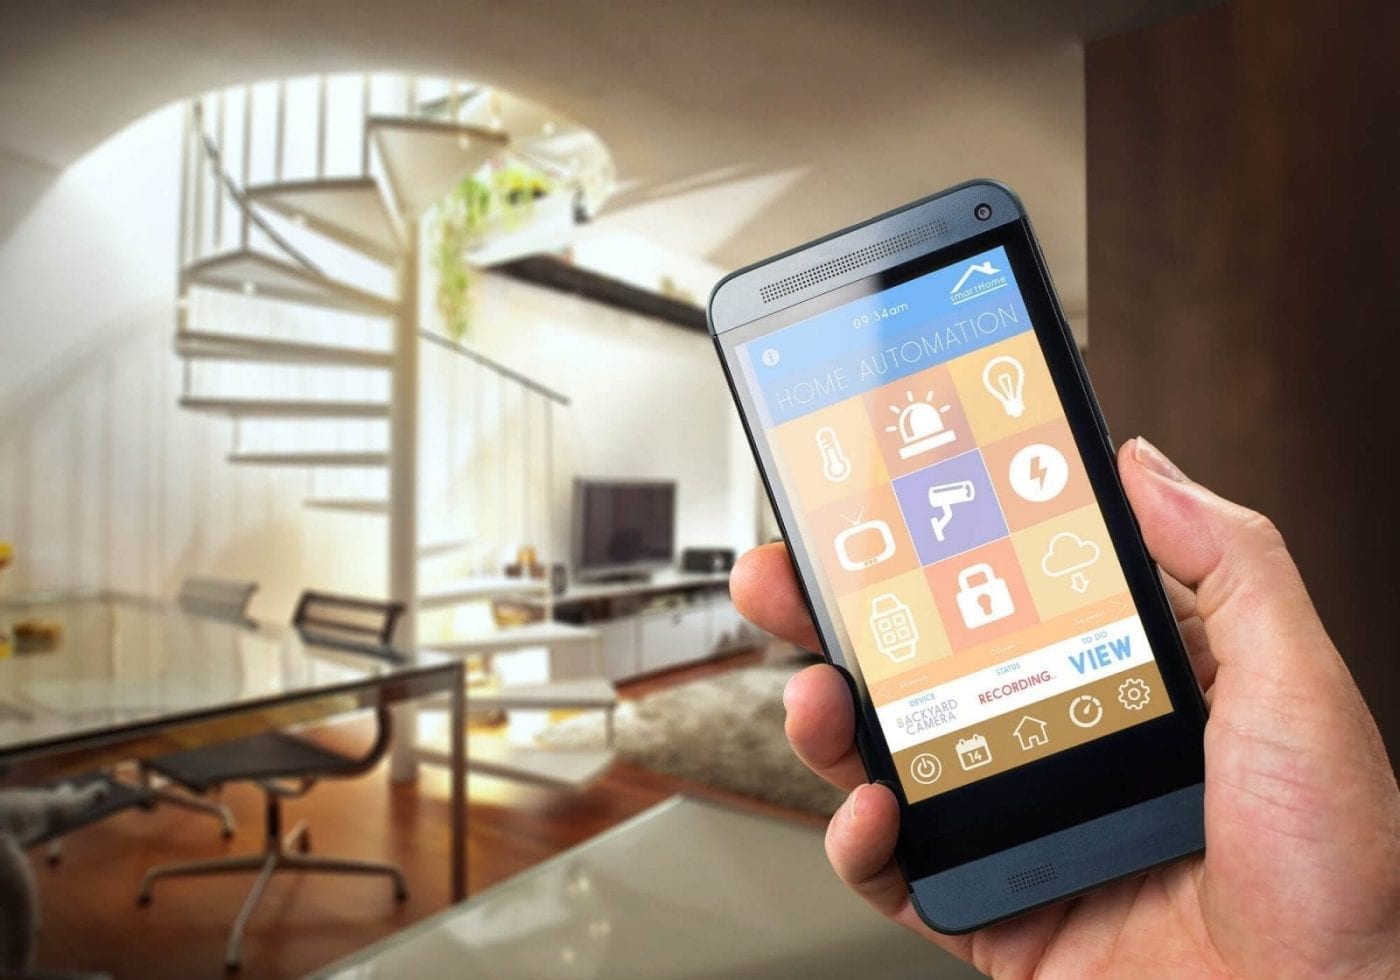 Smartphone in Hand With Opened Home Automation Application